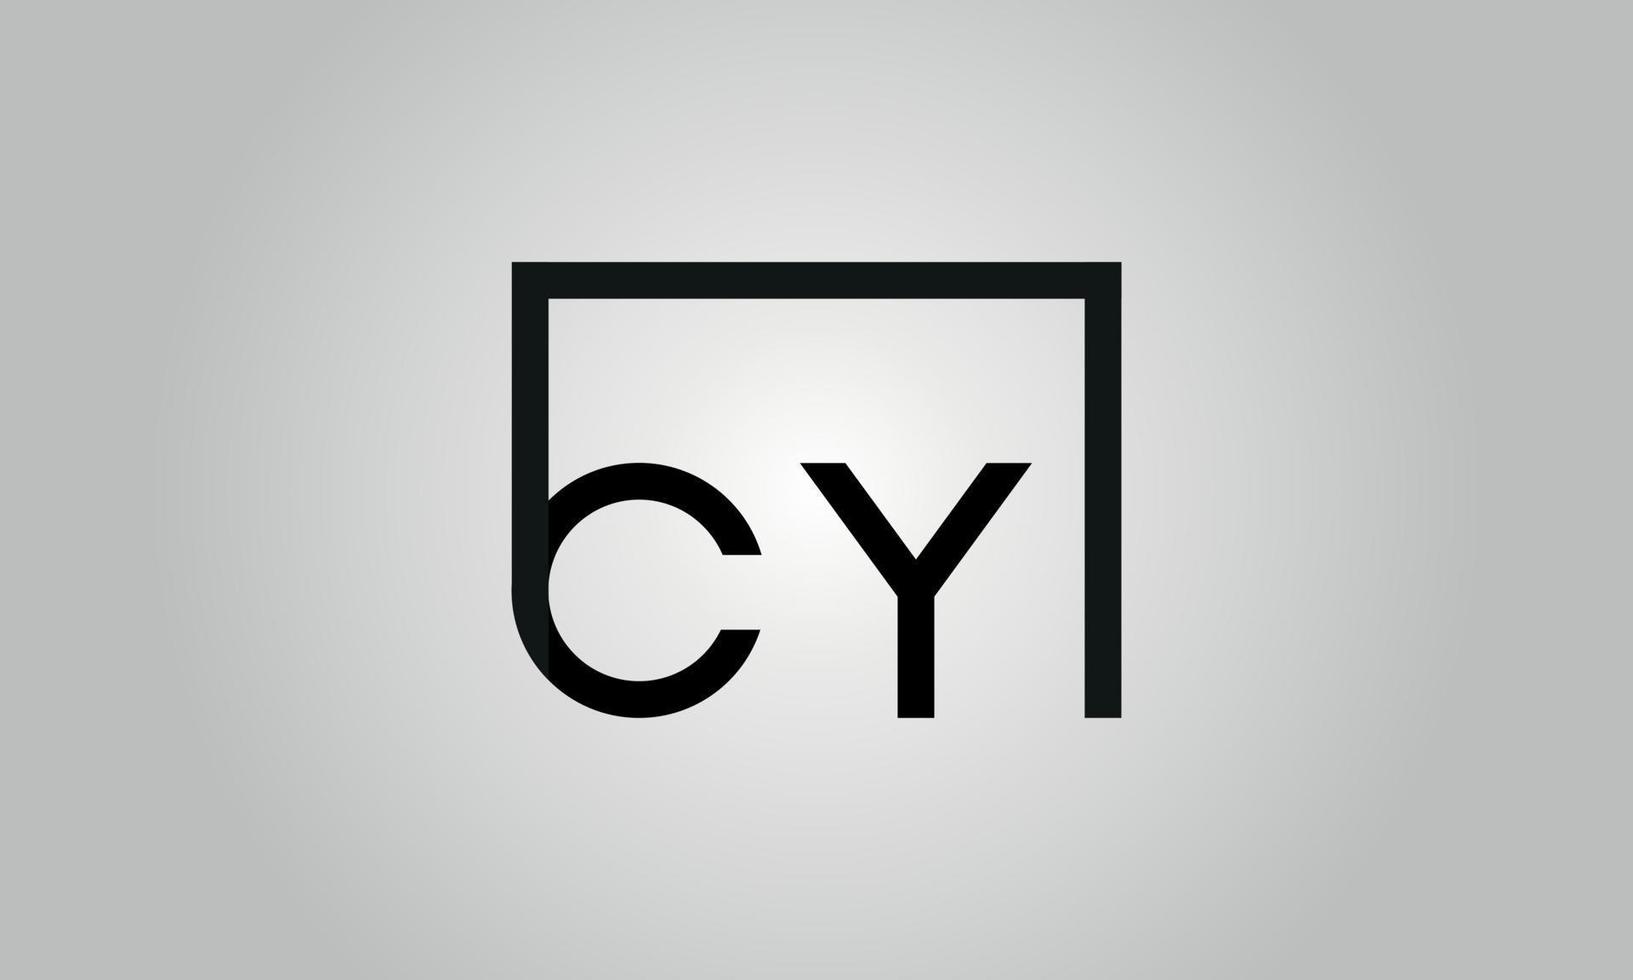 Letter CY logo design. CY logo with square shape in black colors vector free vector template.